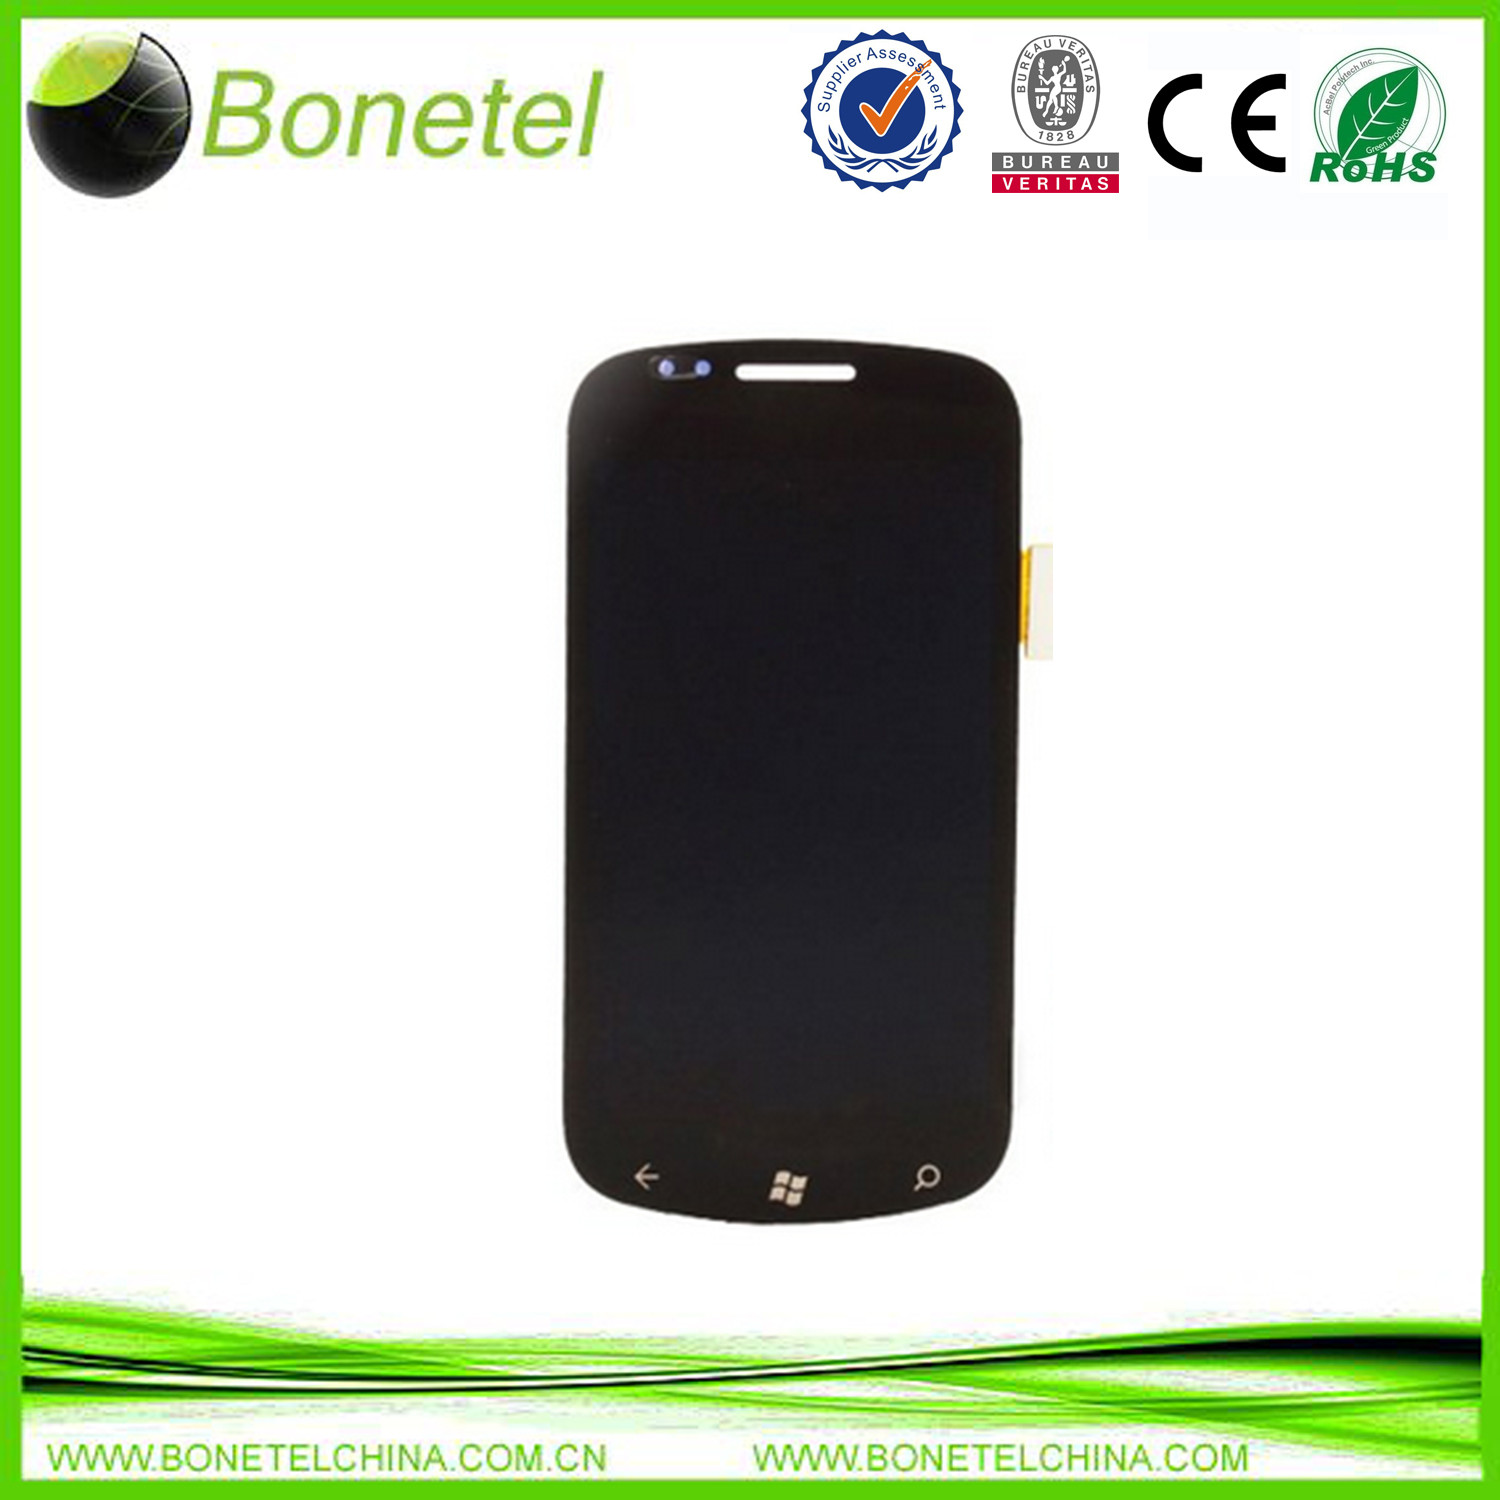 Full LCD Screen Display + Touch Screen Digitizer Glass for SamSung Focus i917